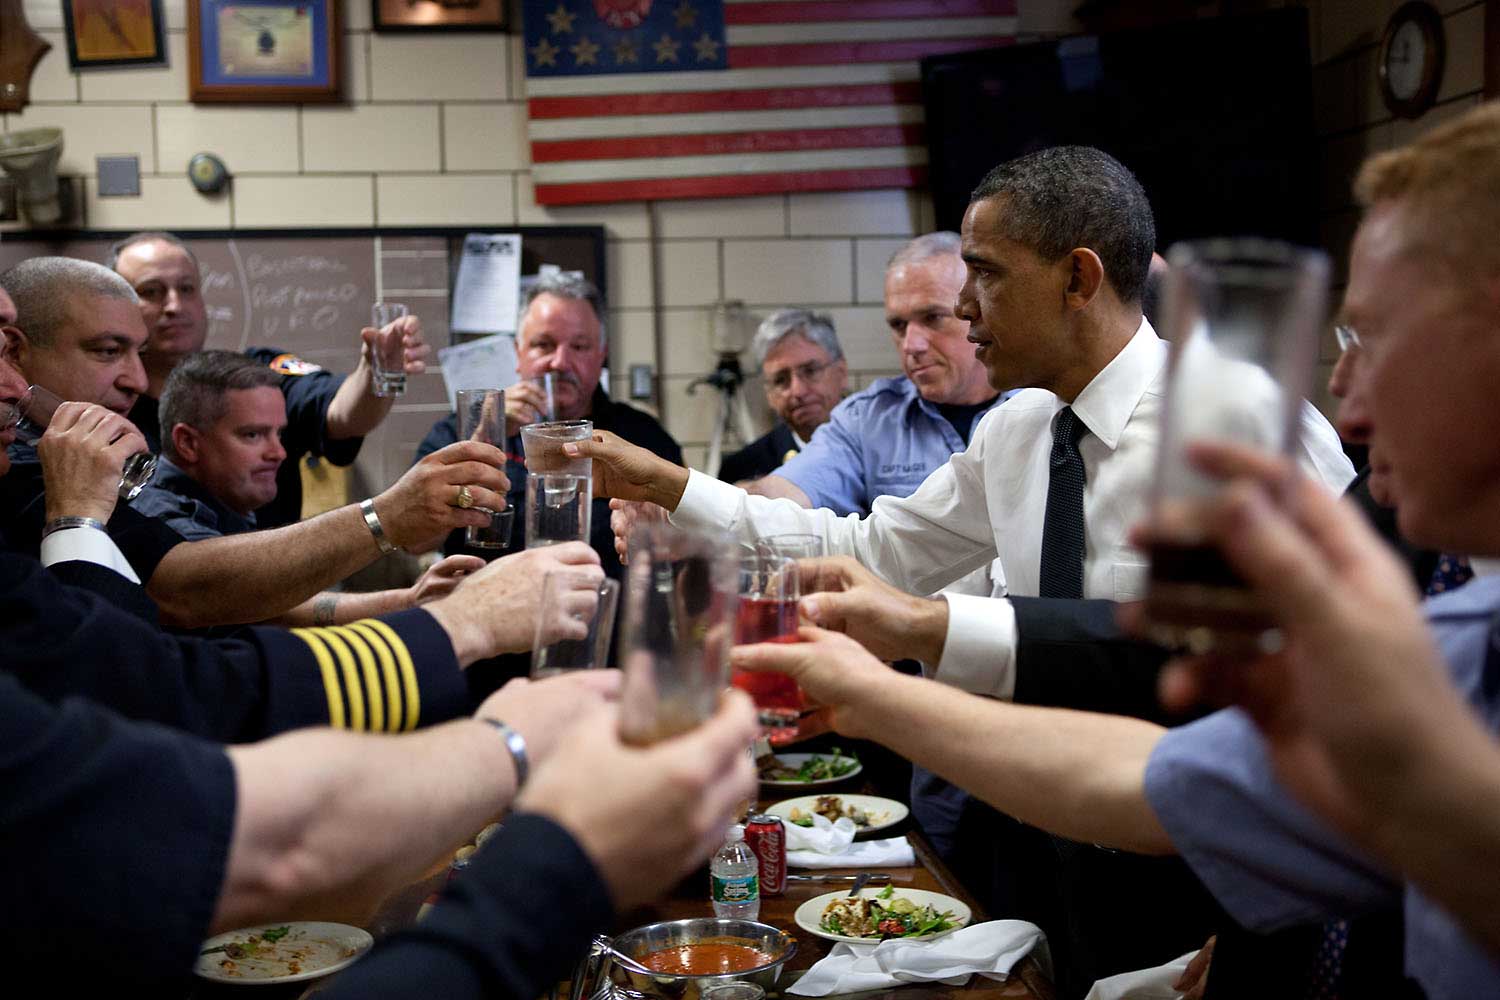 A few days after the mission against bin Laden, on May 5, 2011, the President traveled to New York City to meet with families of the 9/11 victims. He also visited at the Engine 54, Ladder 4, Battalion 9 Firehouse. The firehouse, known as the "Pride of Midtown," lost 15 firefighters on 9/11 -- an entire shift and more than any other New York firehouse. Here, the firefighters offer an impromptu toast to the President in honor of their fallen comrades during a lunch at the station house."